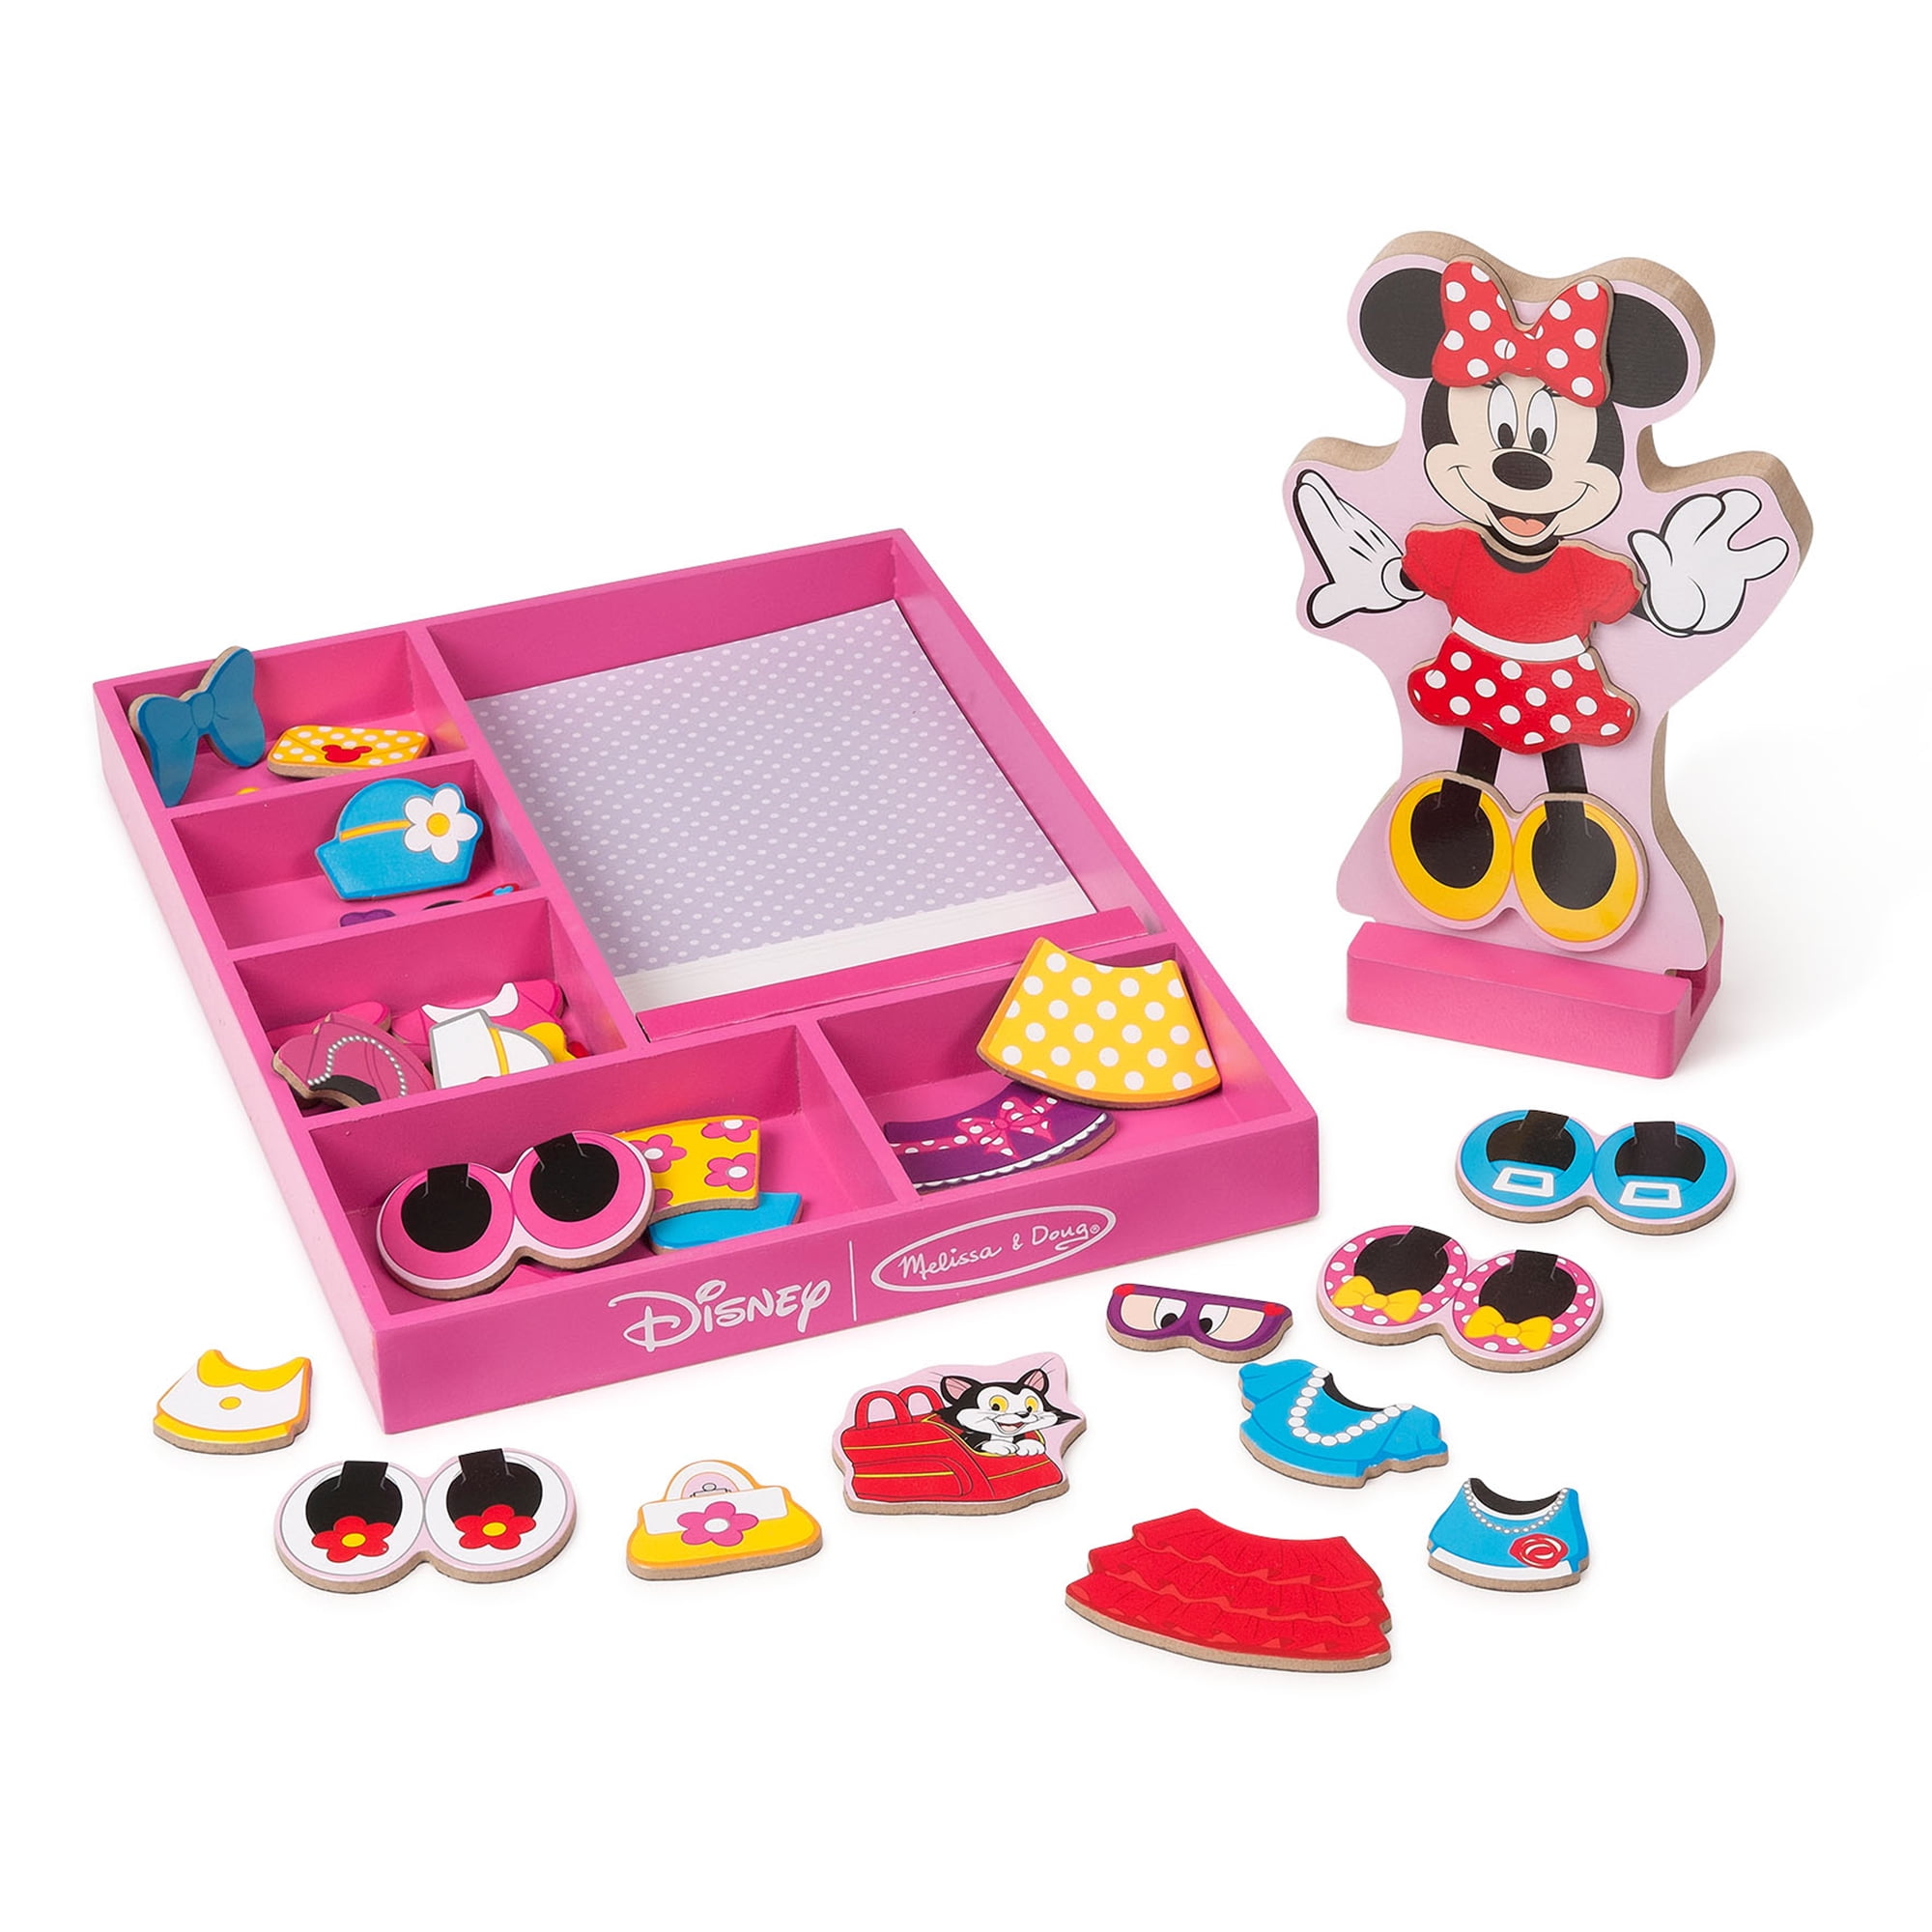 Minnie Mouse Doll's High Chair Play toy Girls Playset 